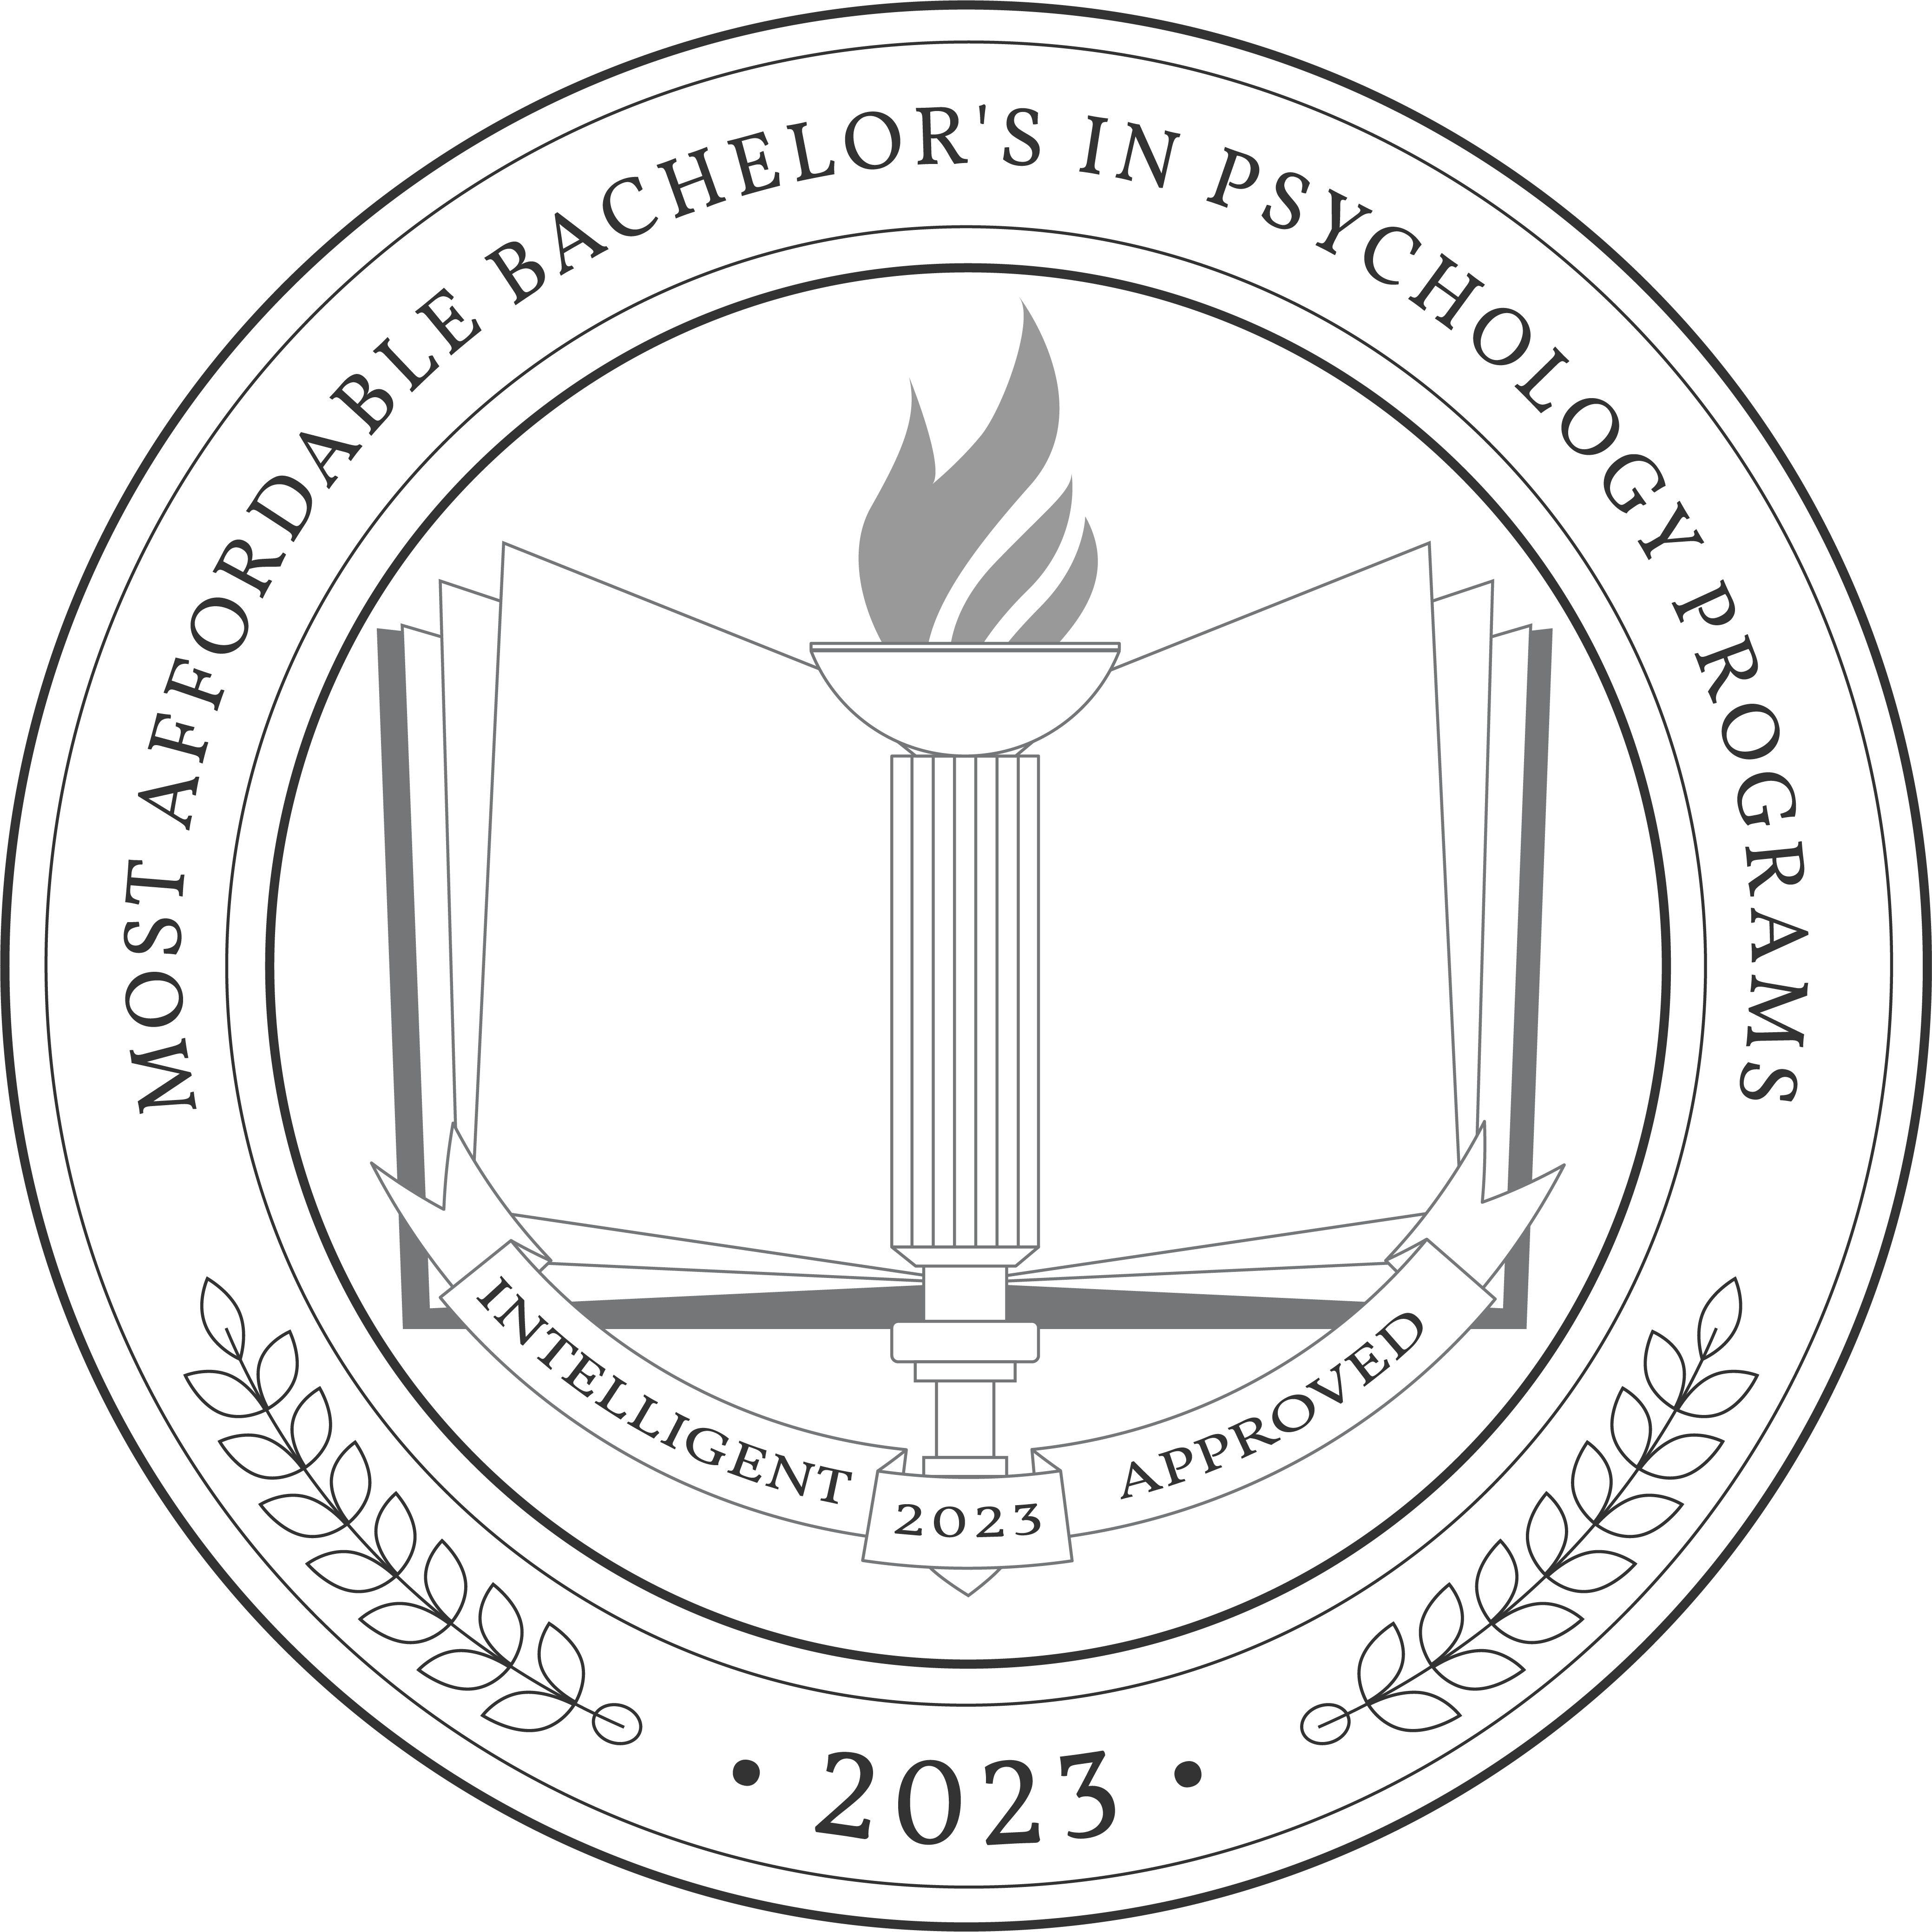 Most Affordable Bachelors In Psychology Programs 2023 Badge 